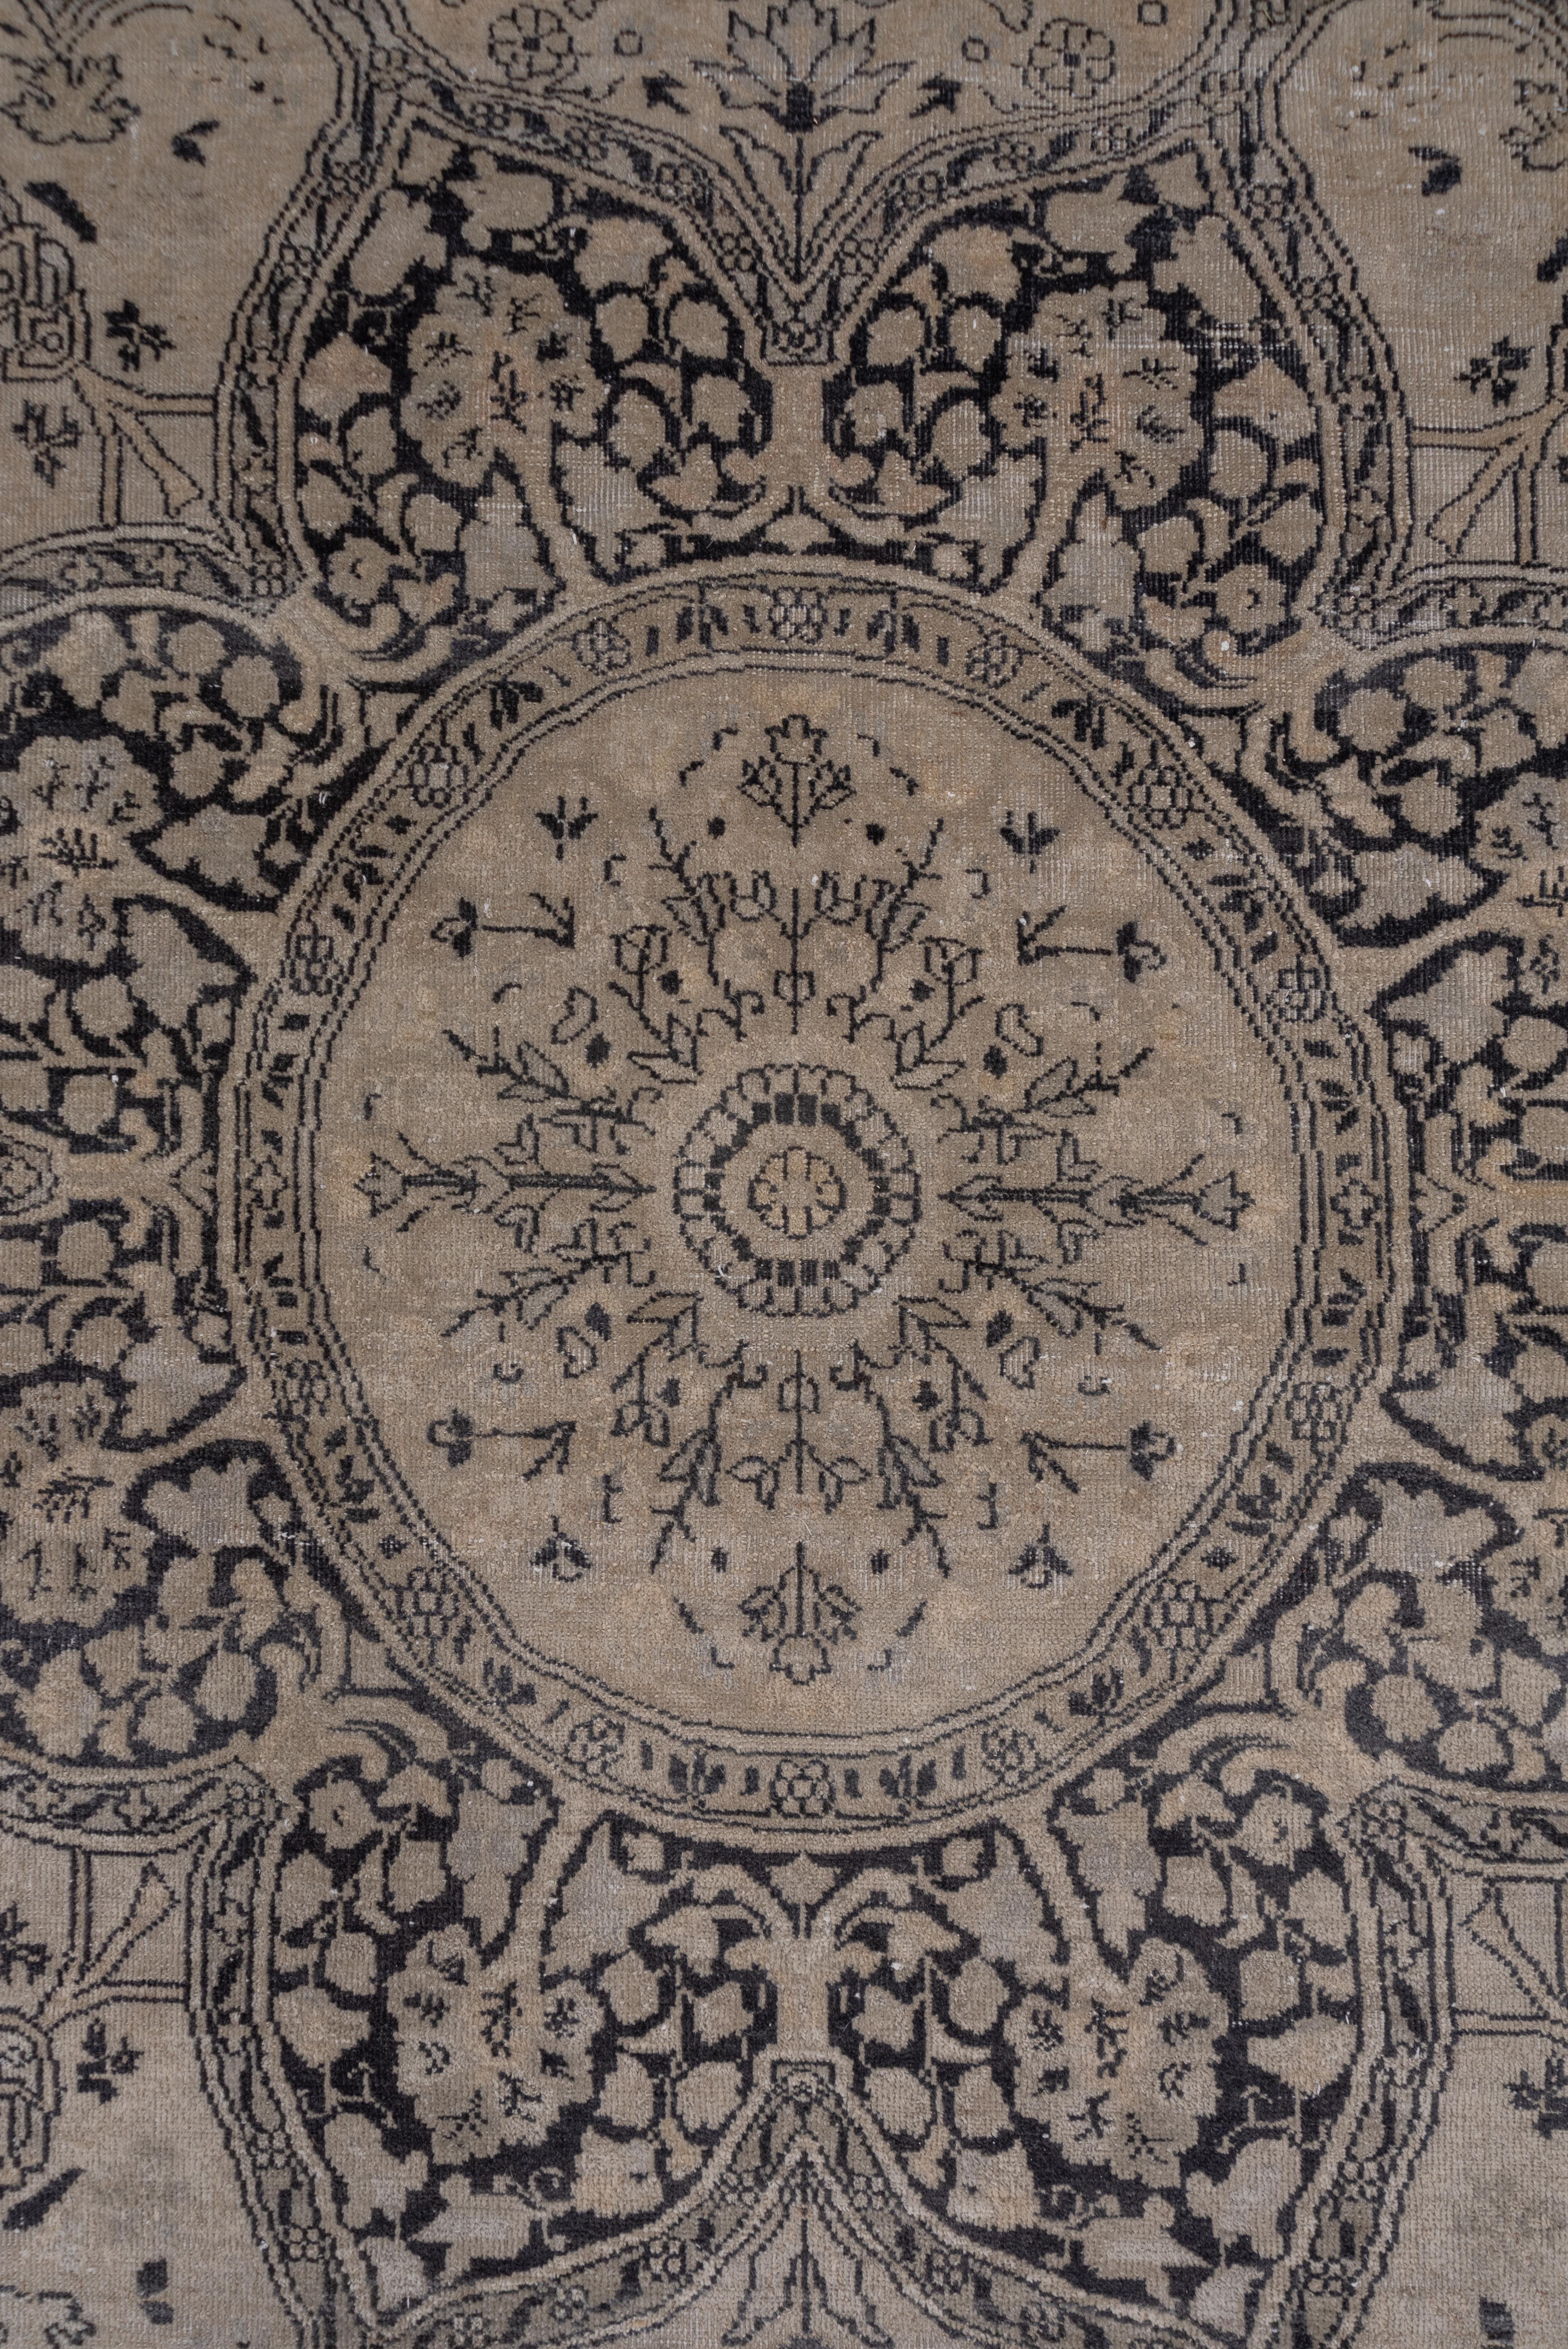 Kerman Themed Antique Sivas Carpet In Excellent Condition For Sale In New York, NY